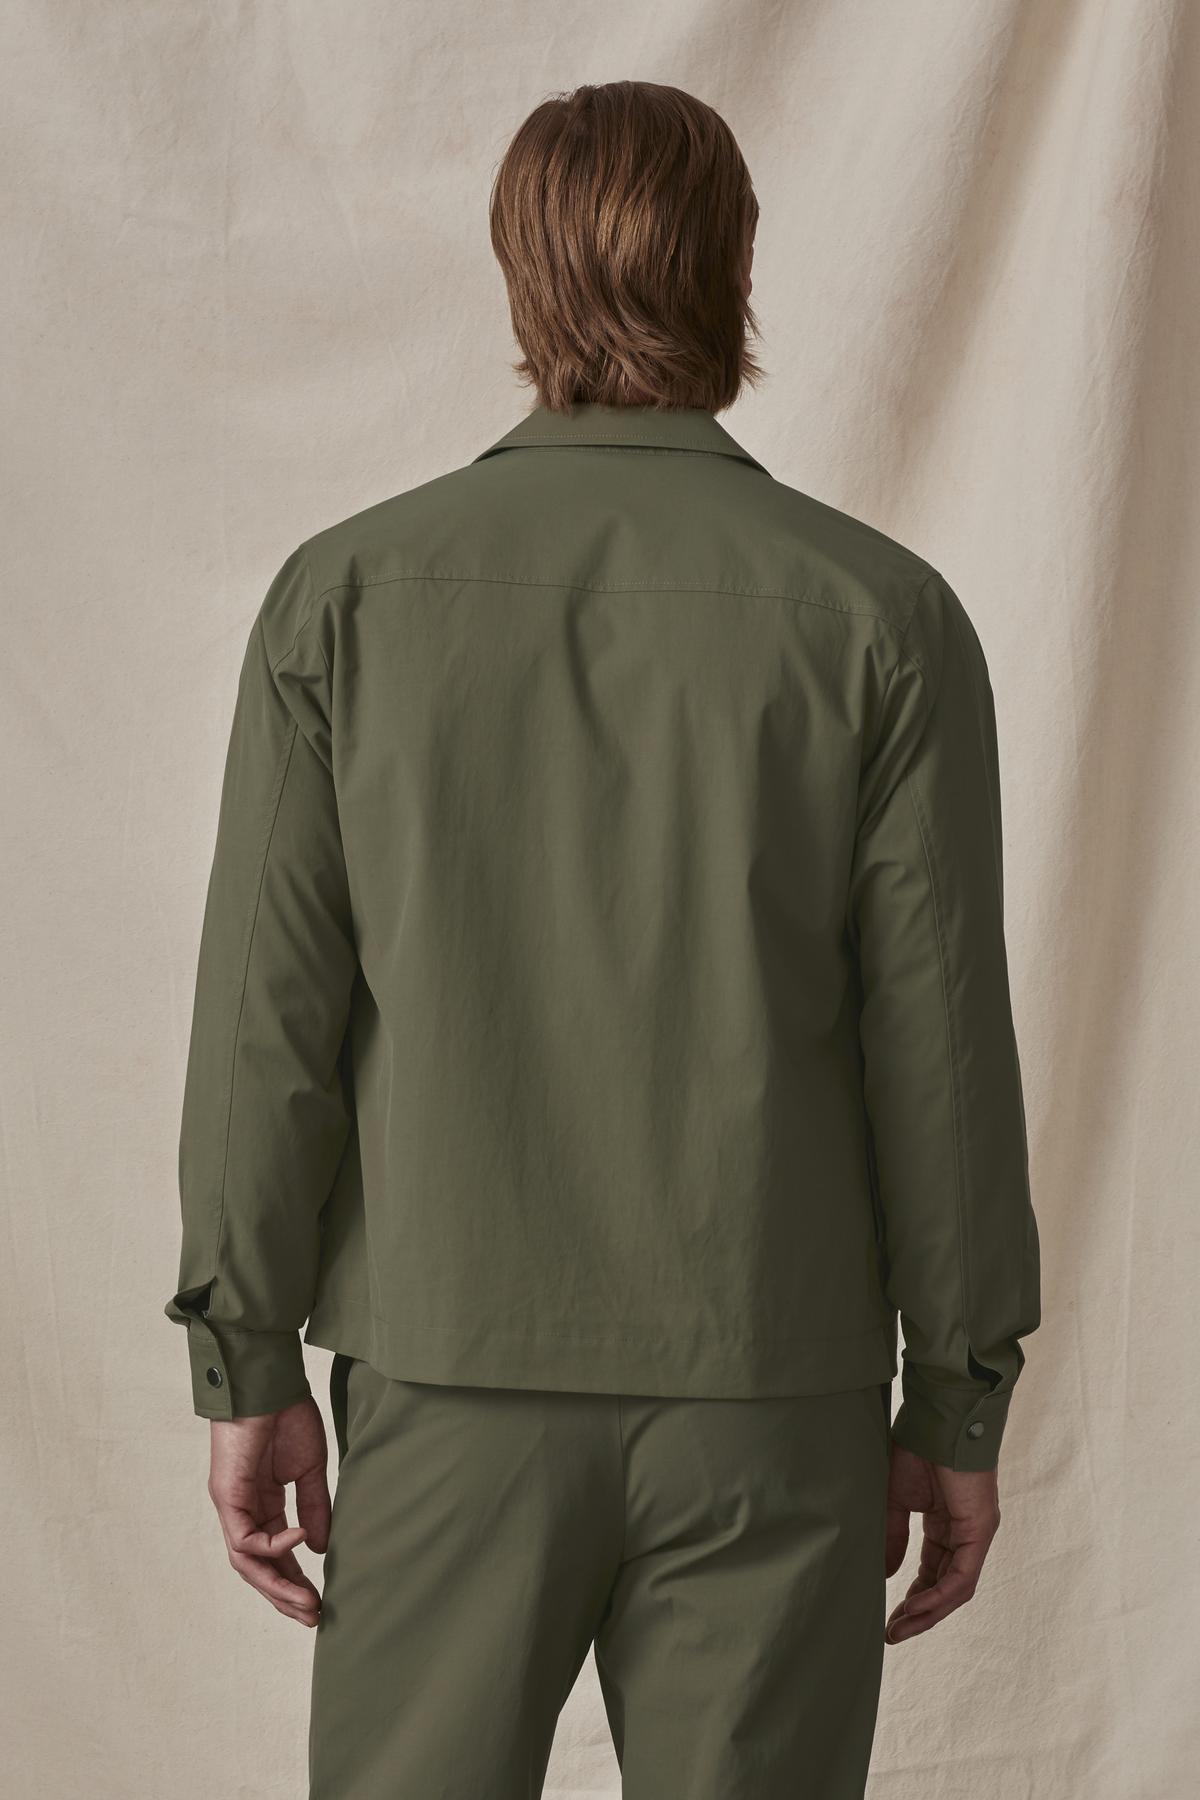 Man wearing a green velvet by Graham & Spencer cotton blend shirt and pants, viewed from behind.-36299656331457